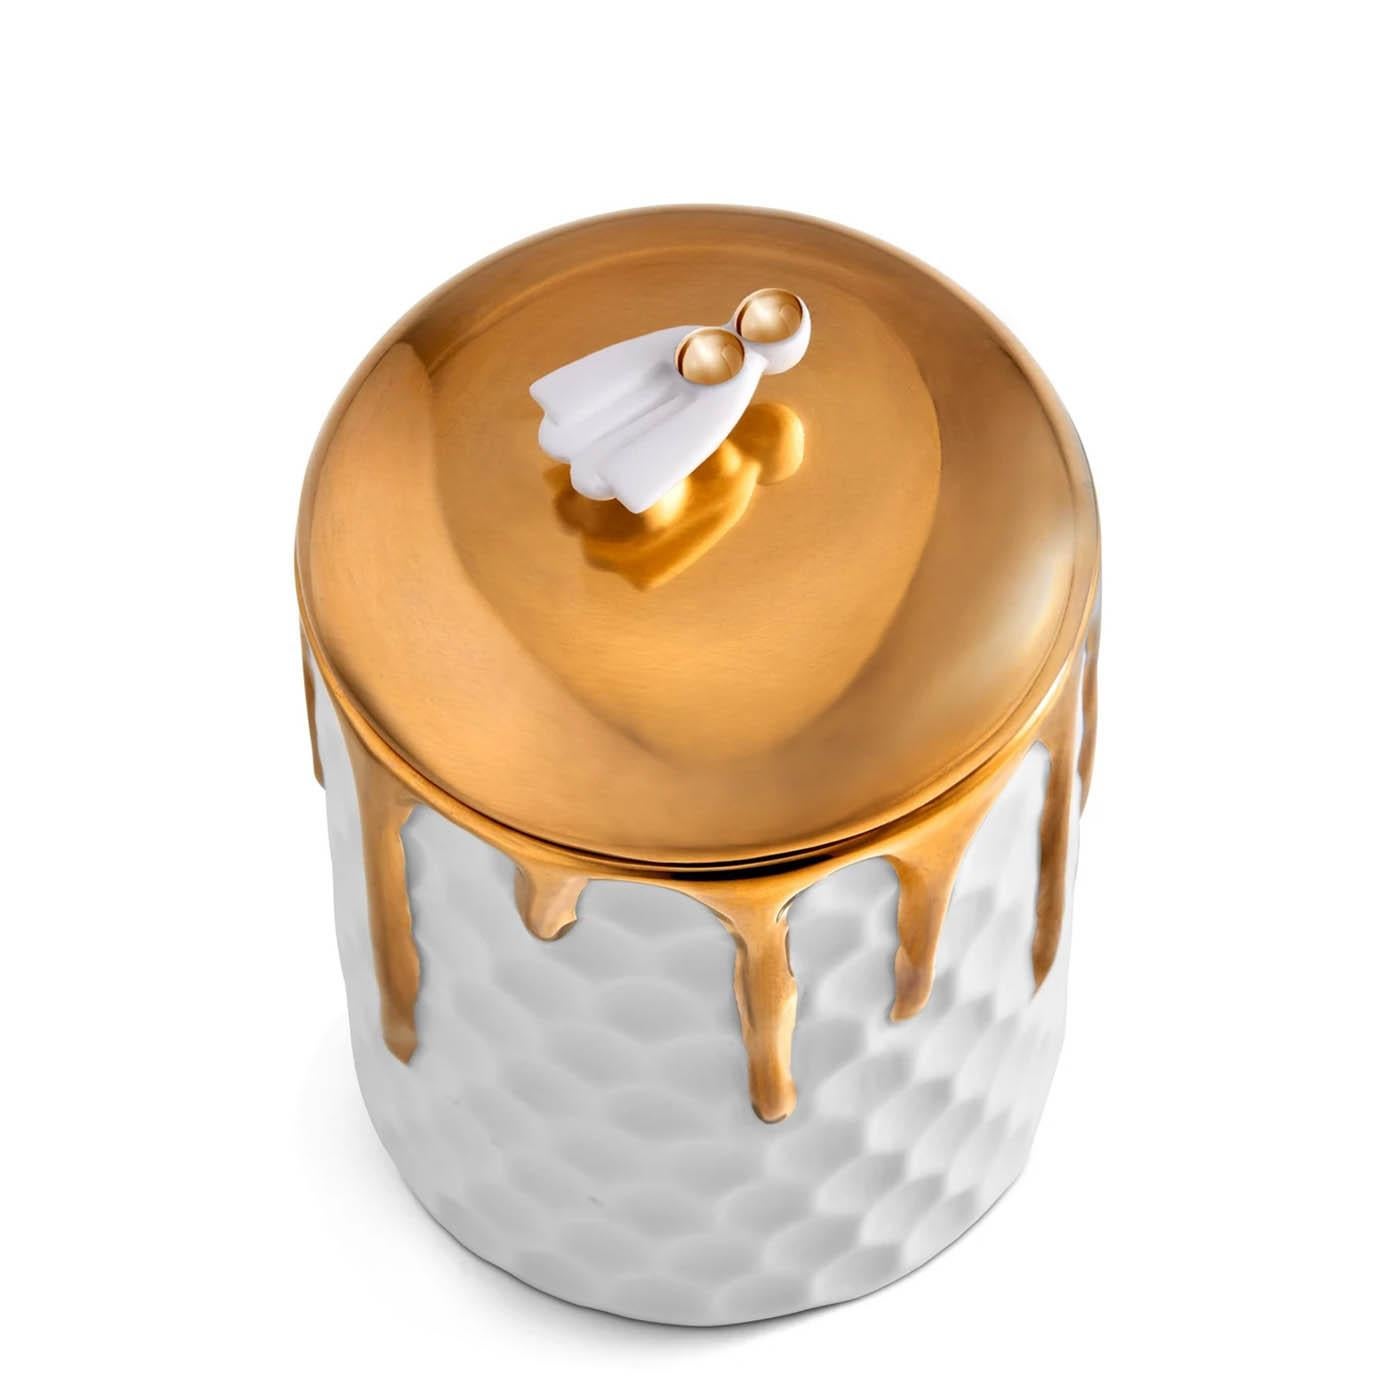 Candle Box Golded Bee made in porcelain with bee on
the lid. Lid in 24 24-karat gold-plated. In white finish porcelain 
and in 24-karat gold-plated. Include paraffin wax with single 
wick. Delivered in a luxury gift box.